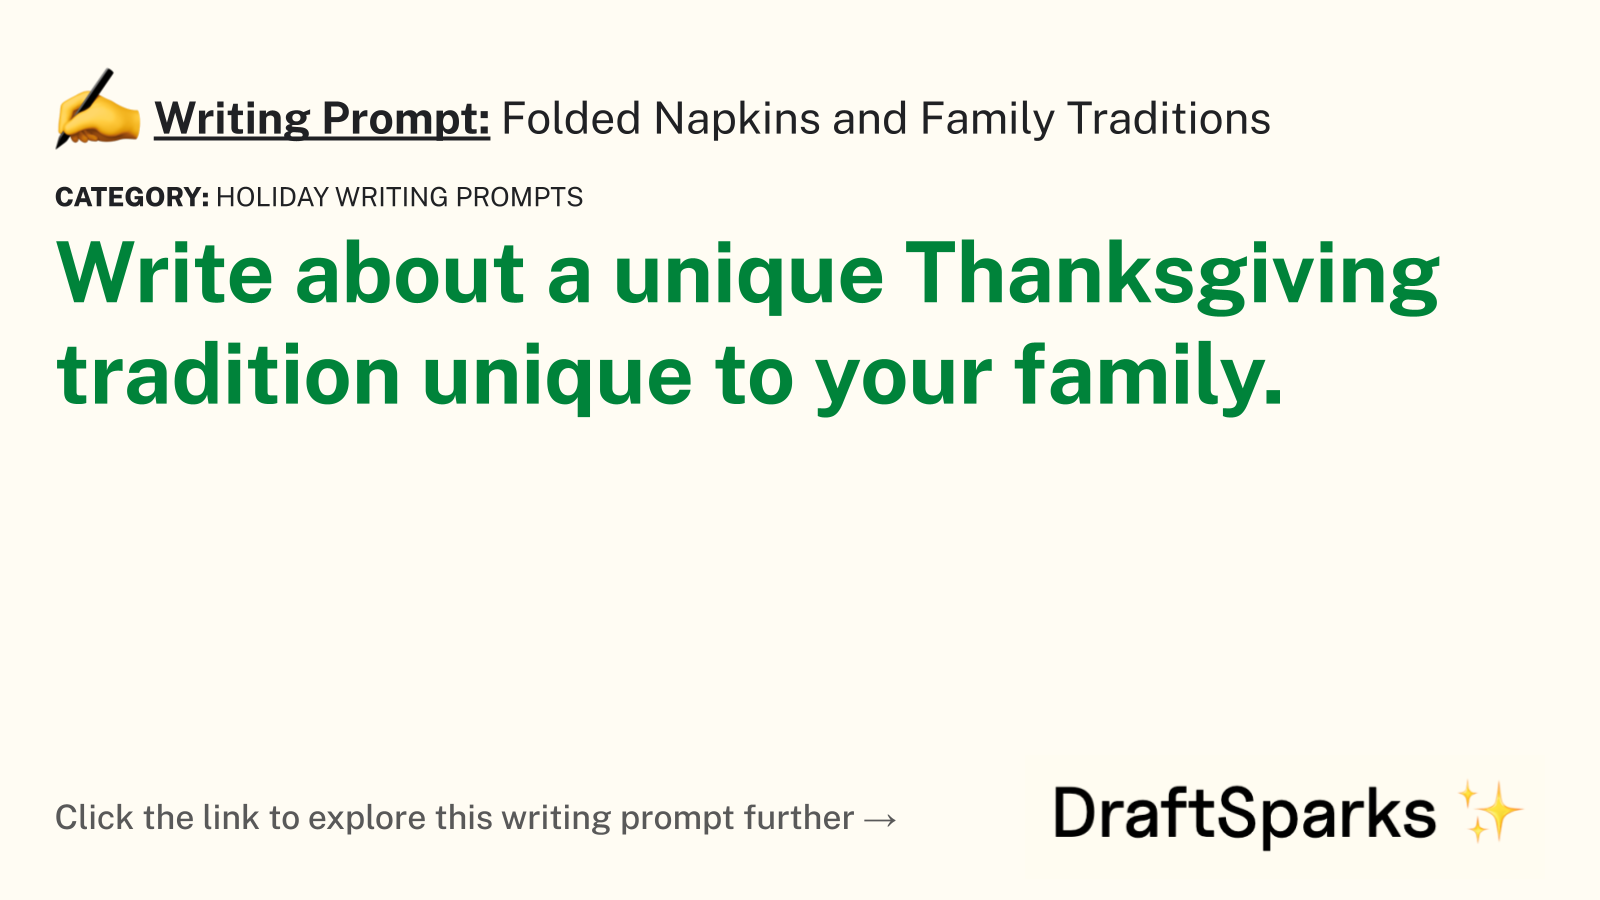 Folded Napkins and Family Traditions